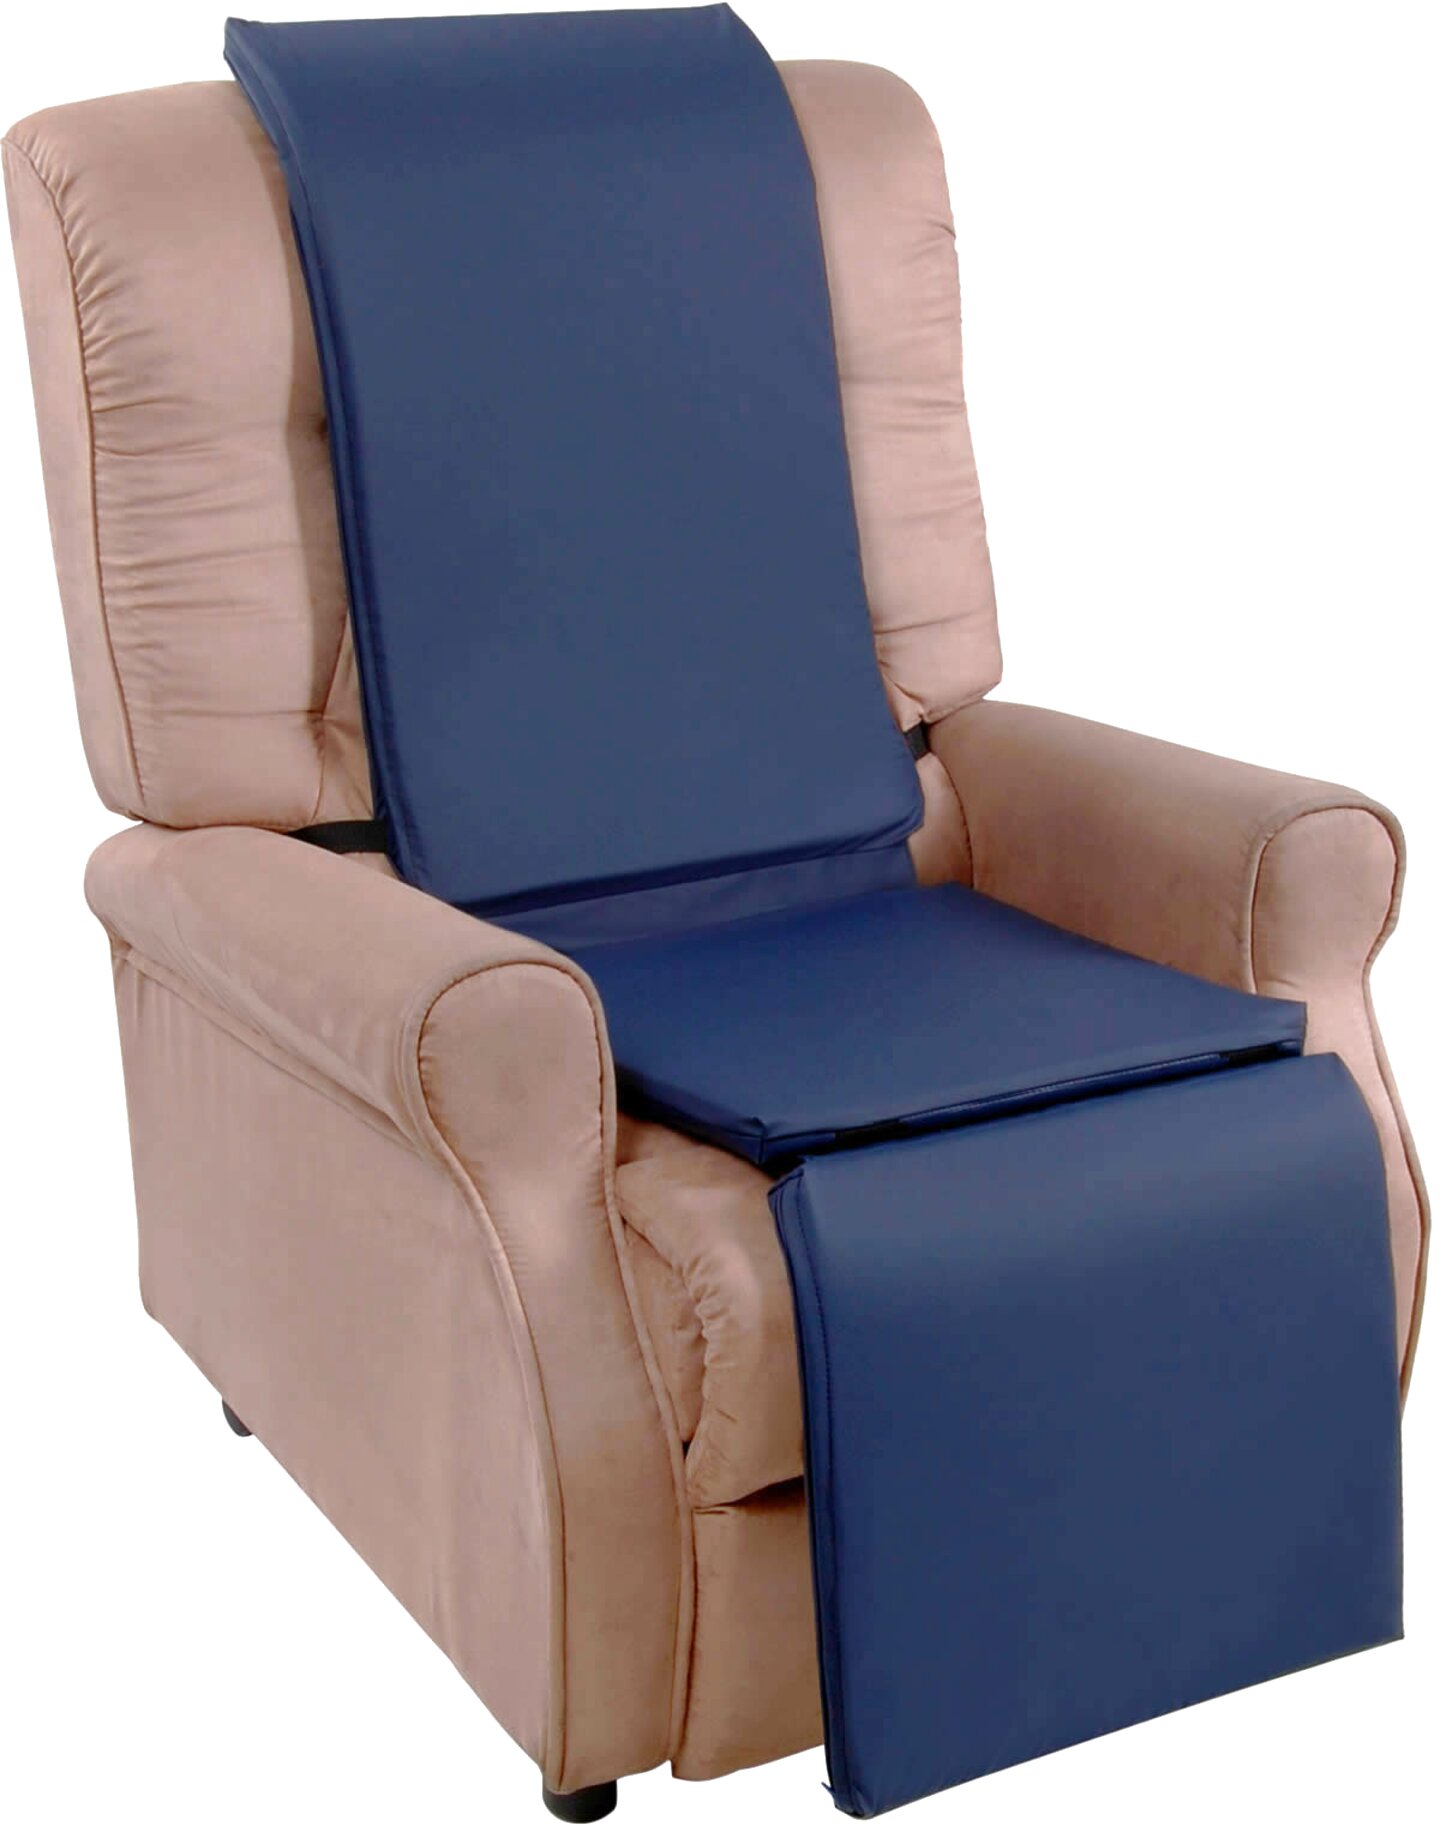 Products HFC143 Full System Recliner%2Bchair%2Bcushion 